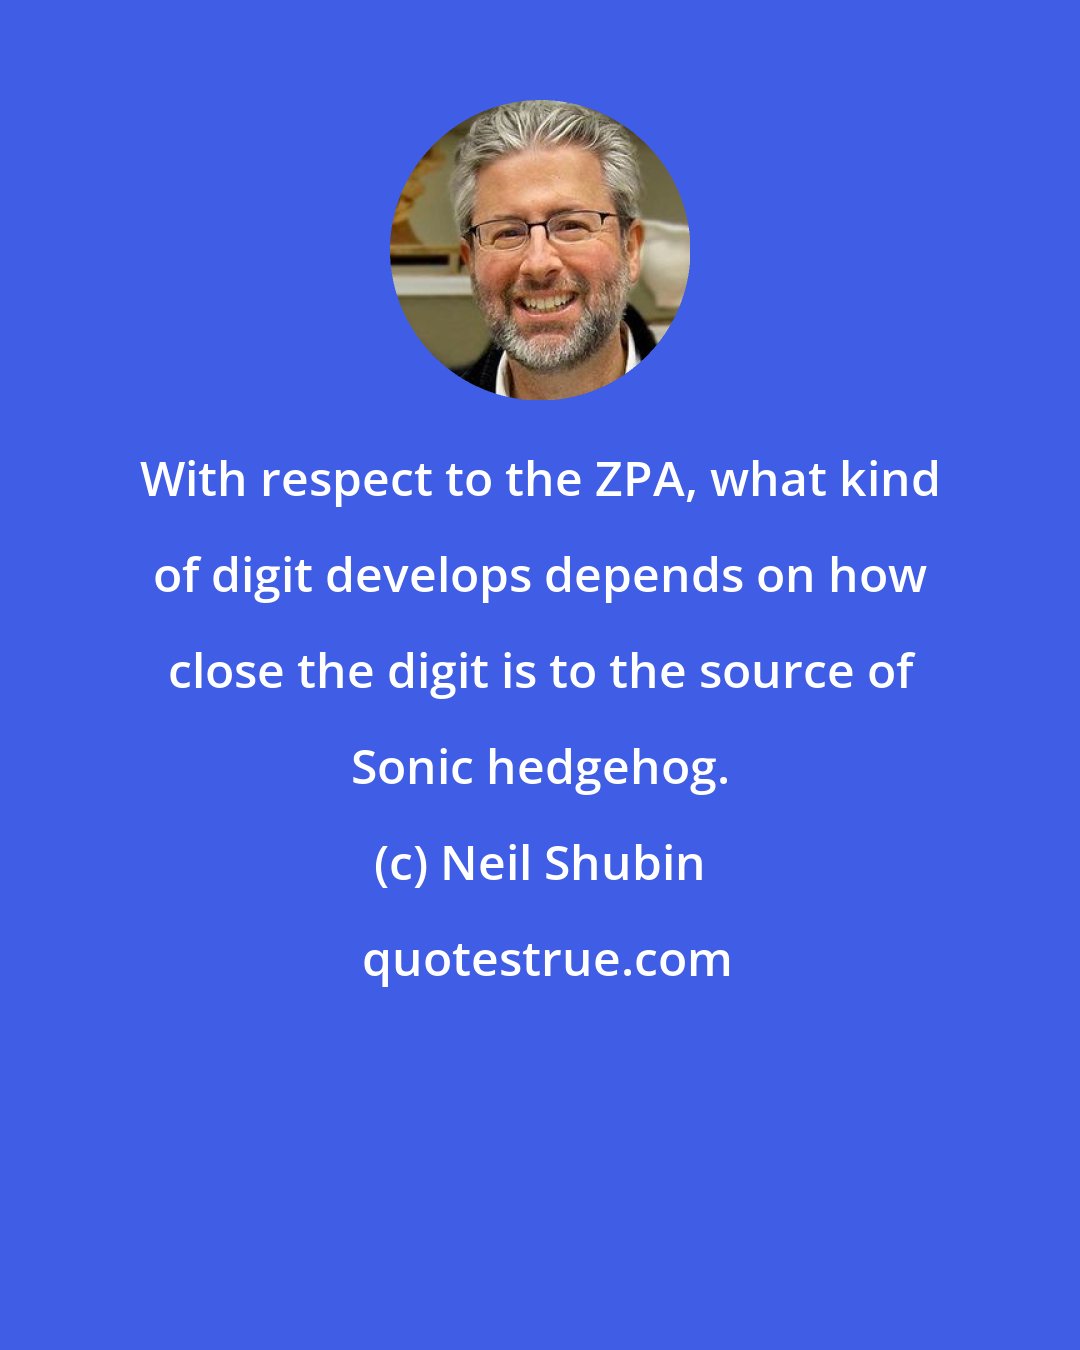 Neil Shubin: With respect to the ZPA, what kind of digit develops depends on how close the digit is to the source of Sonic hedgehog.